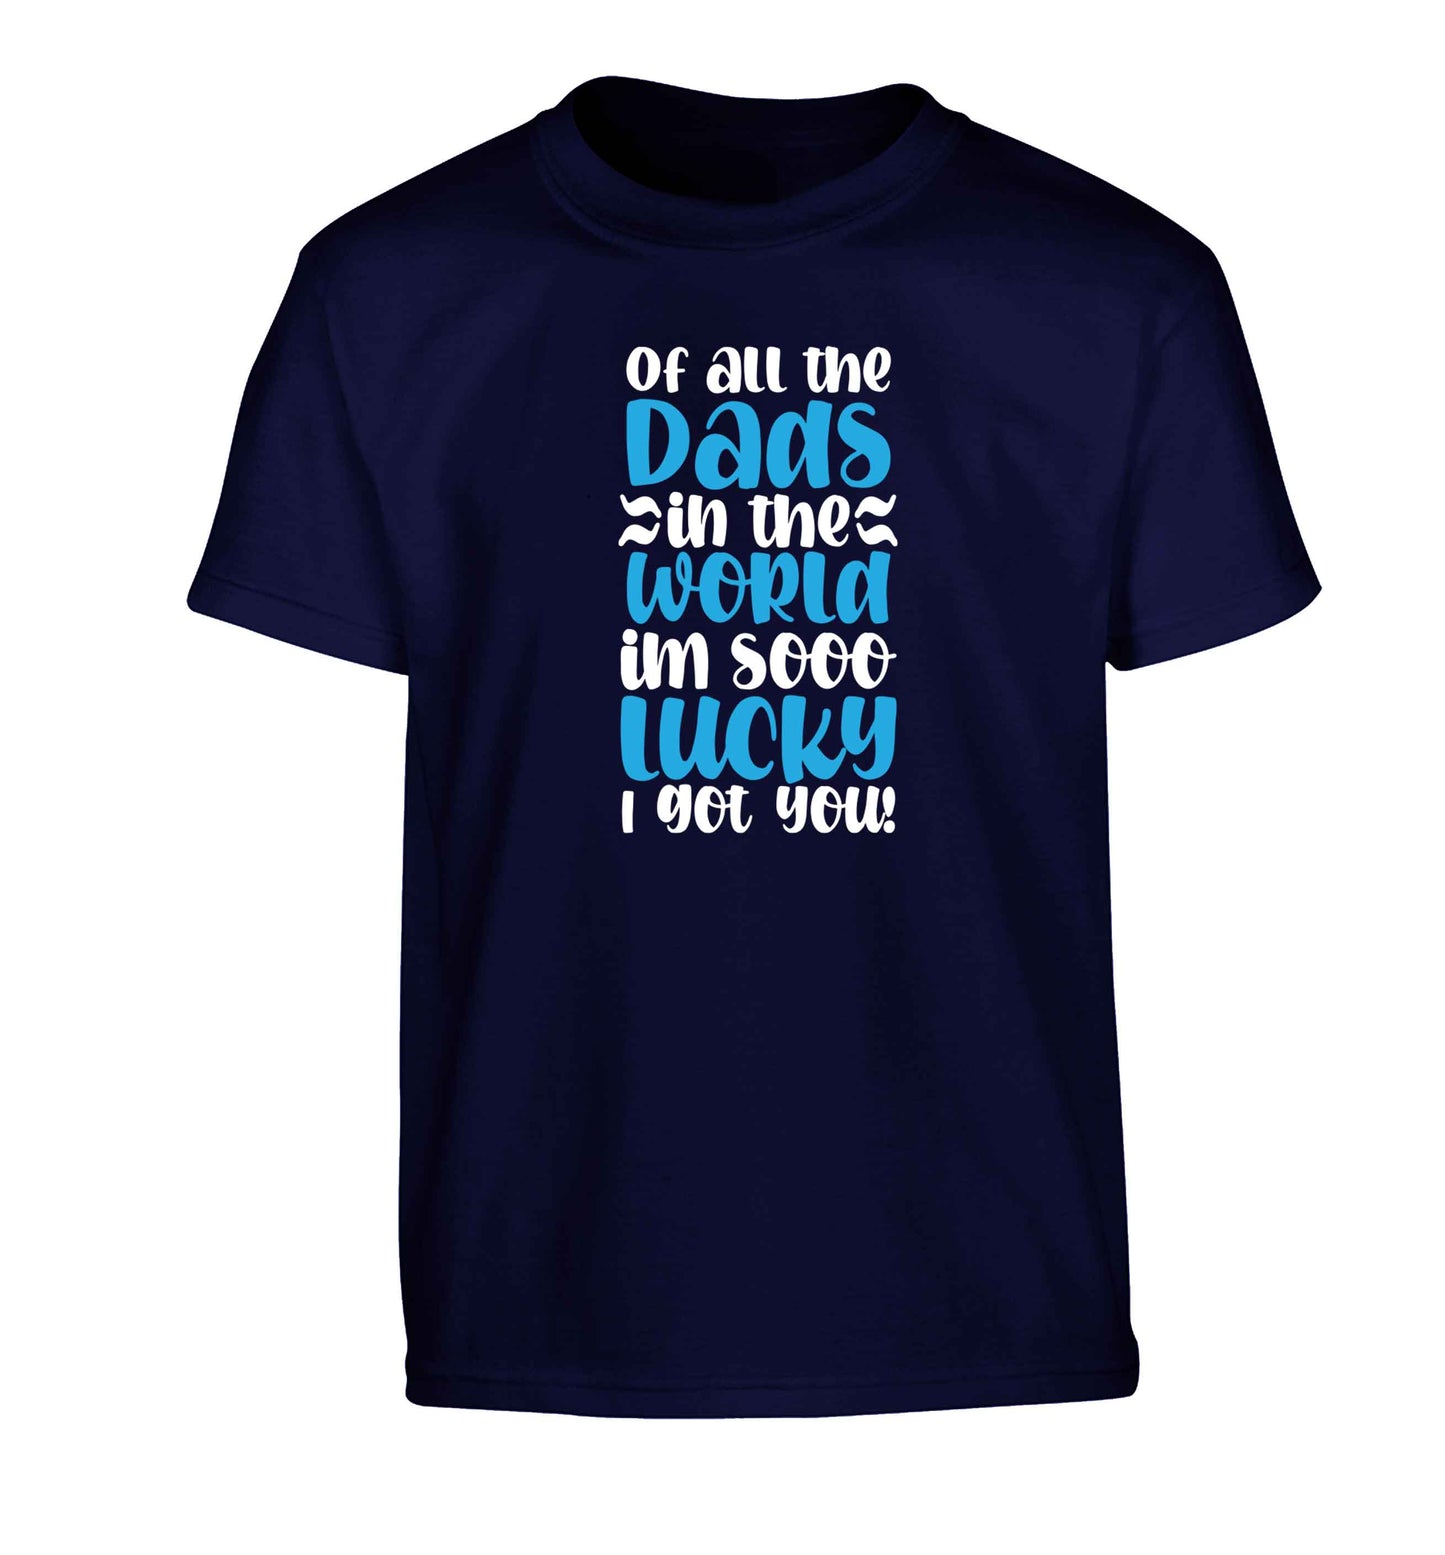 Of all the Dads in the world I'm so lucky I got you Children's navy Tshirt 12-13 Years